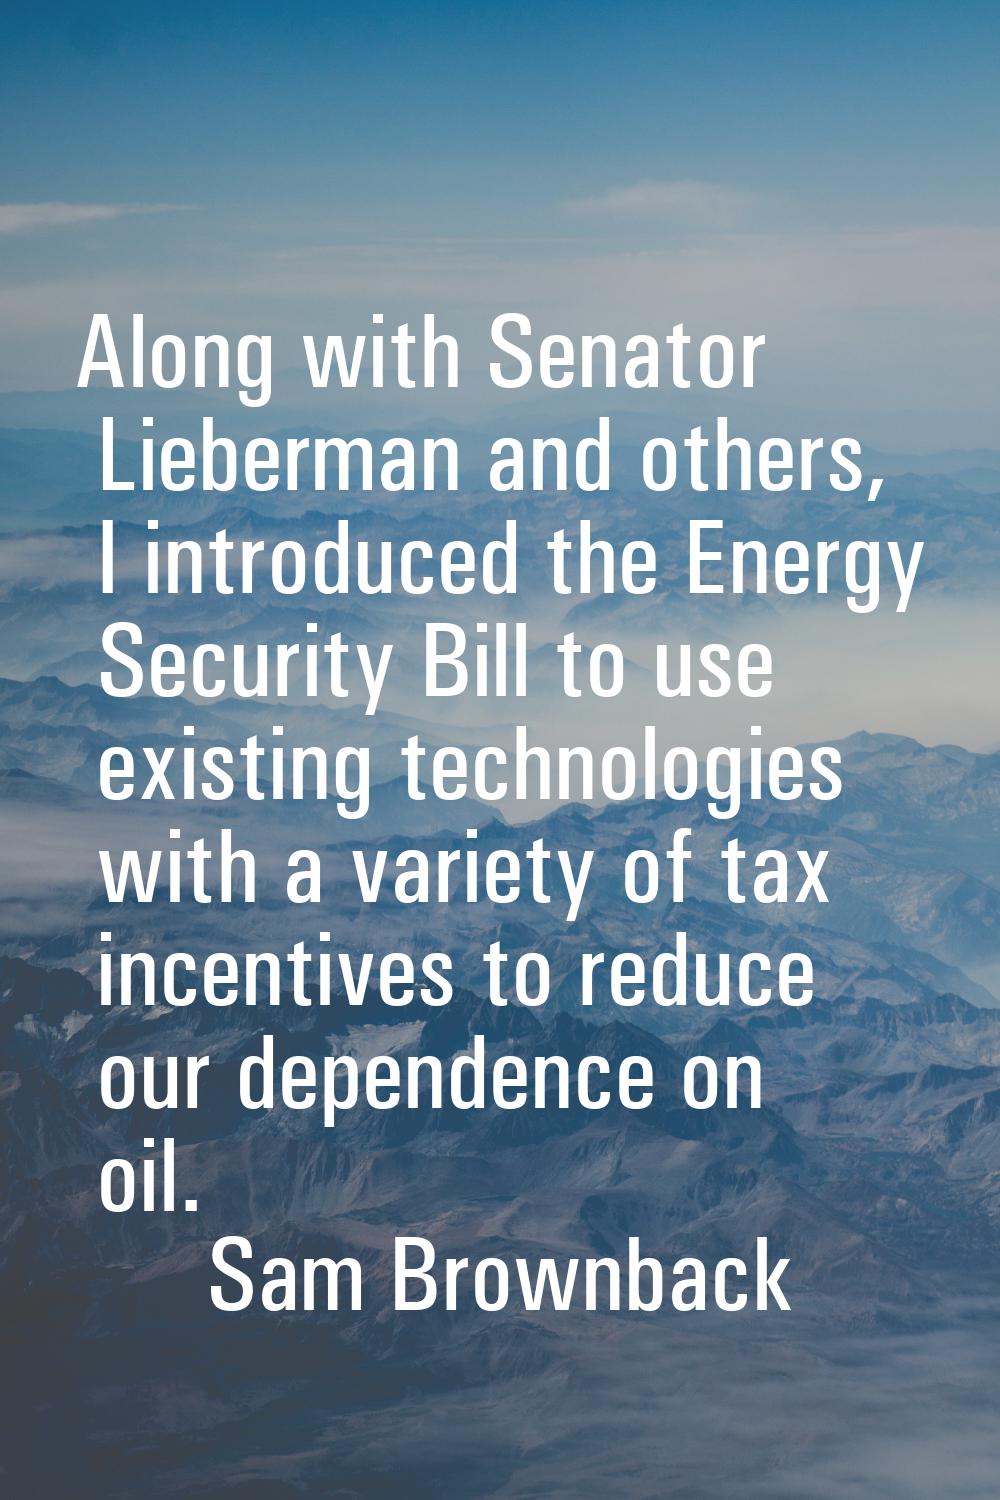 Along with Senator Lieberman and others, I introduced the Energy Security Bill to use existing tech